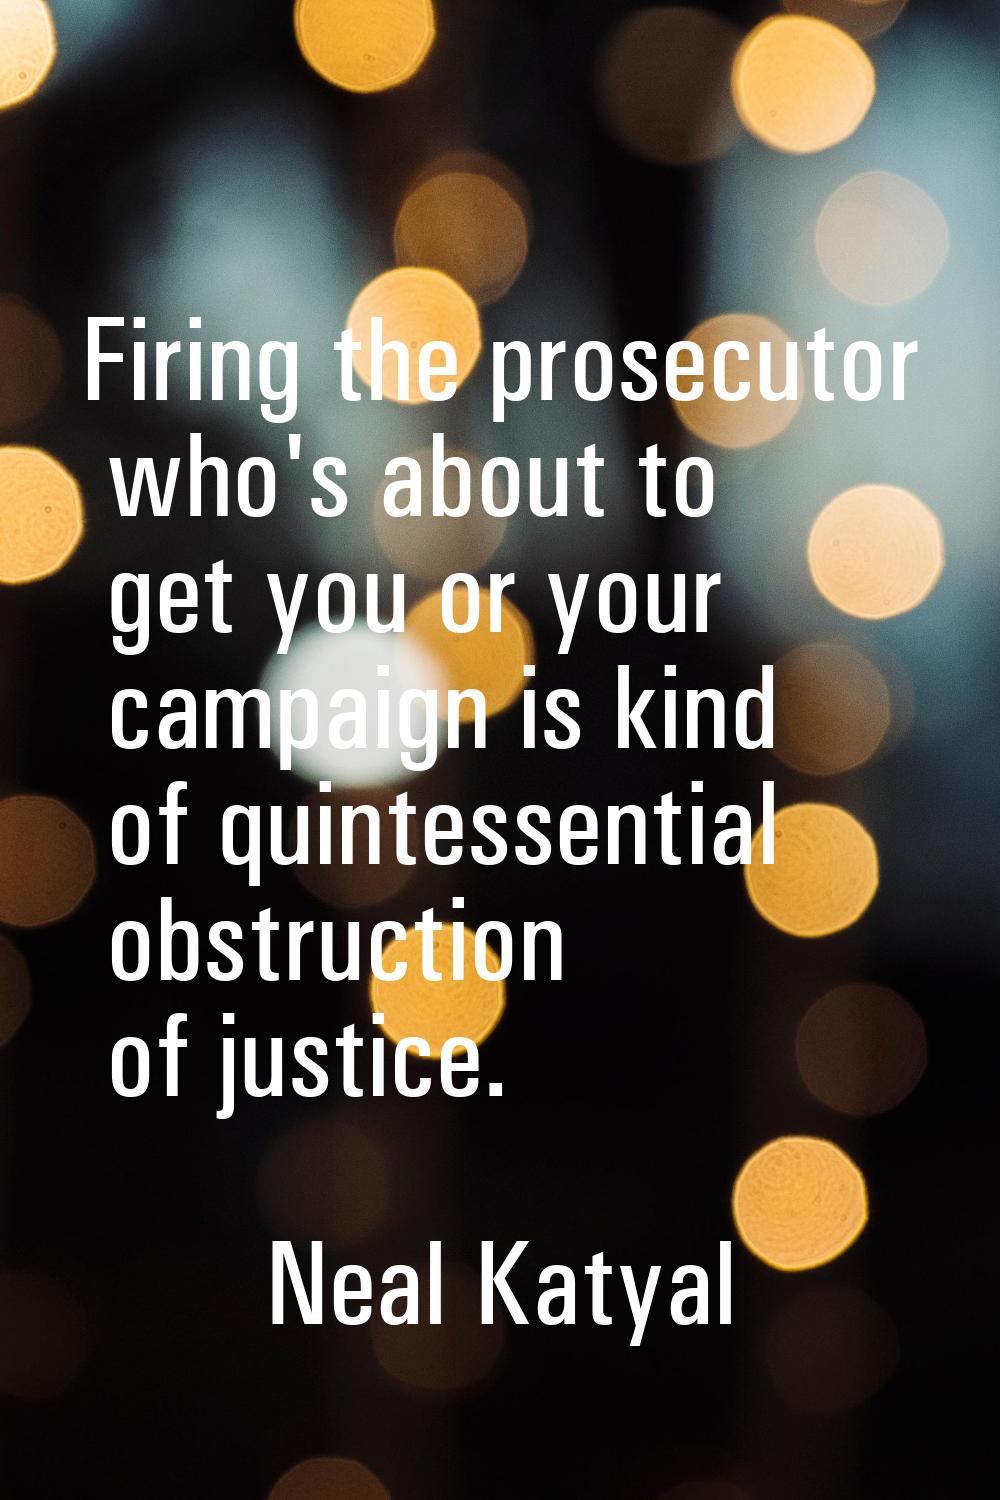 Firing the prosecutor who's about to get you or your campaign is kind of quintessential obstruction